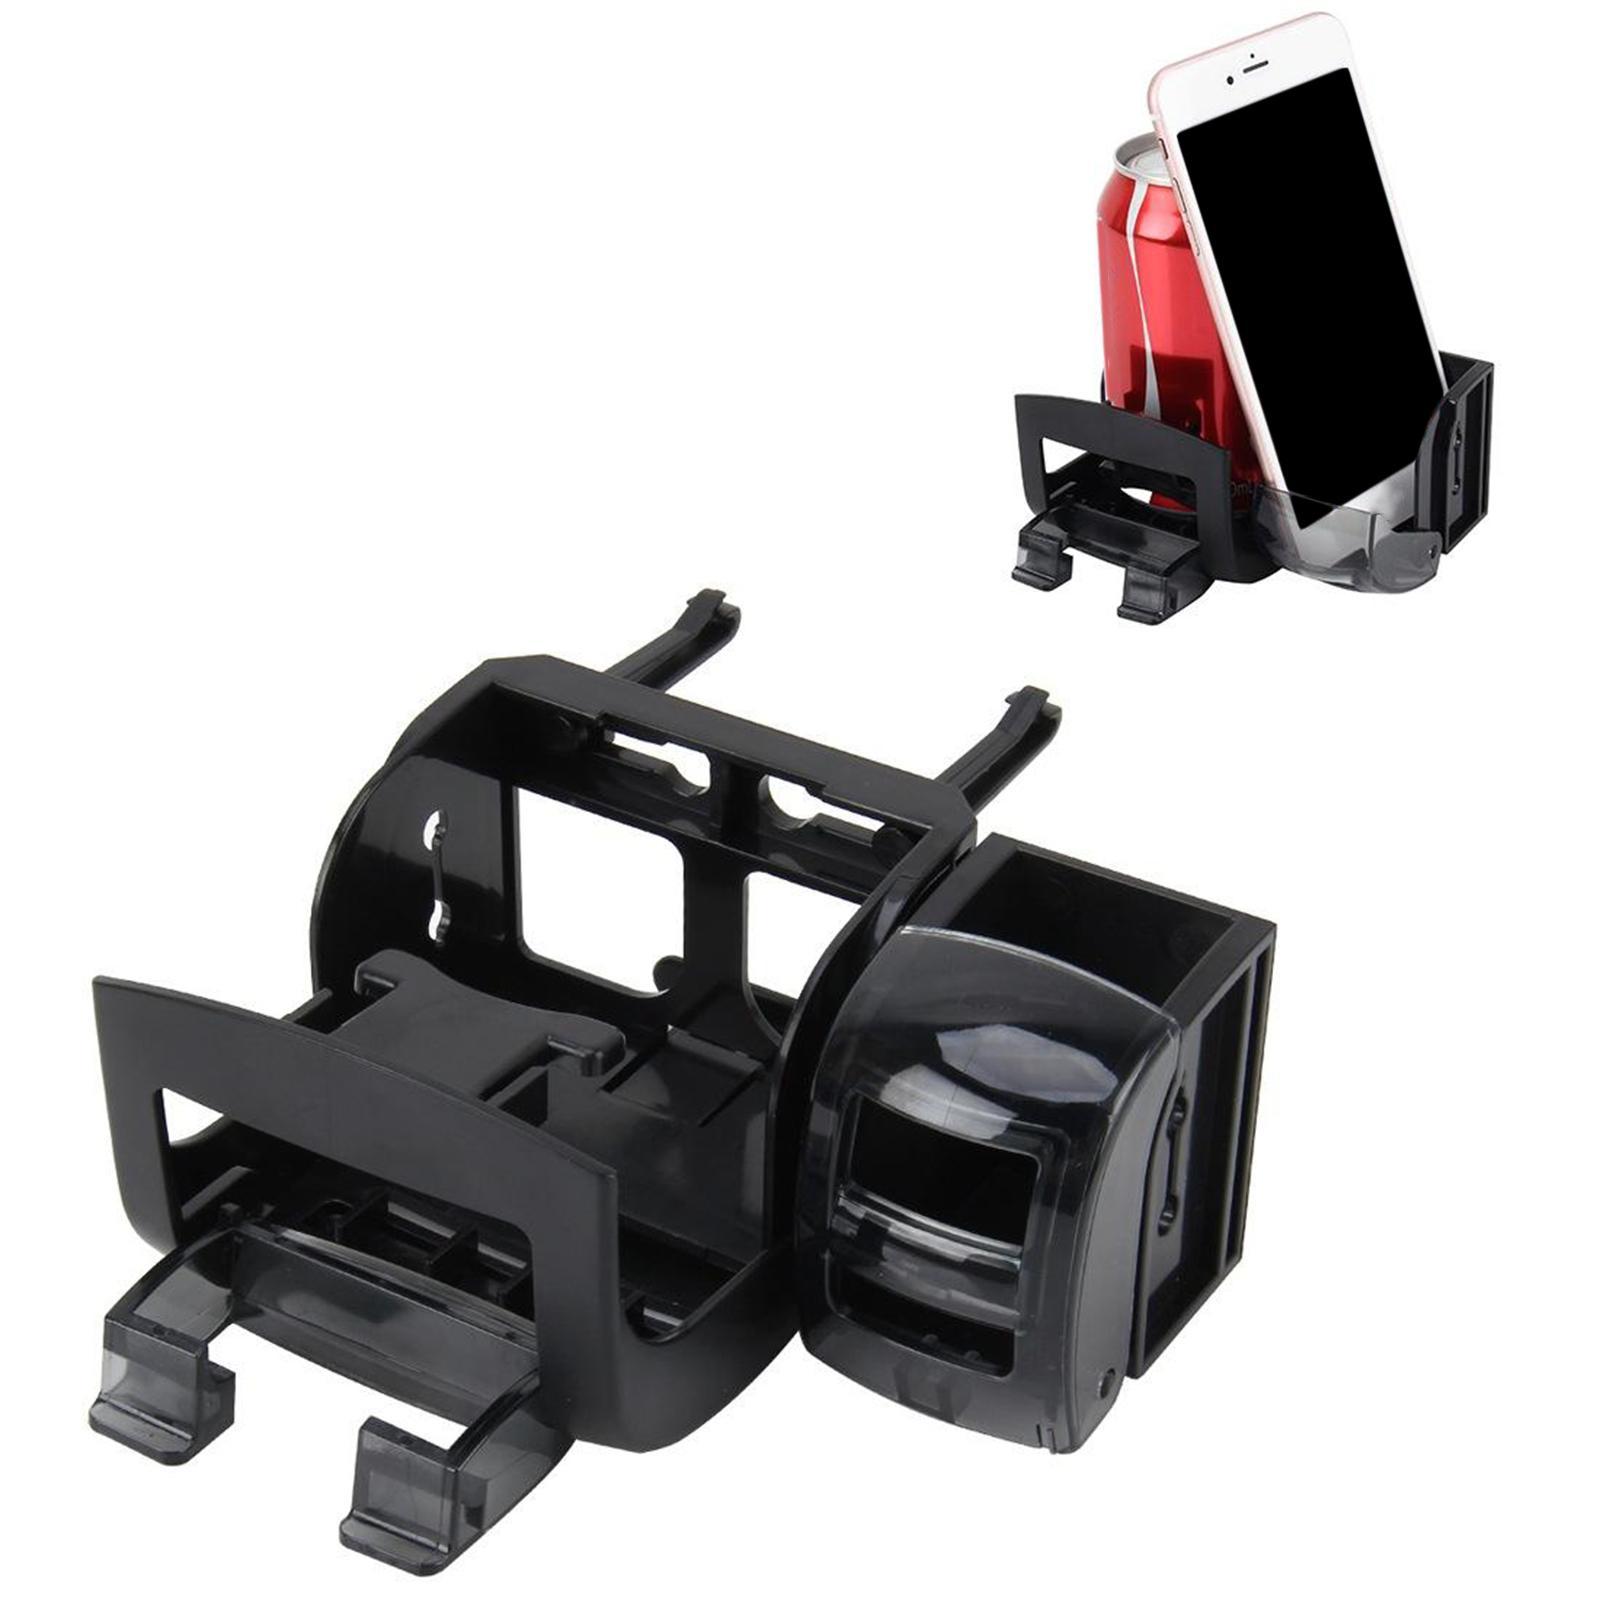 2 in 1 Vehicle Auto Vent Phone Holder Cup Holder Holder, Cell Phone Holder